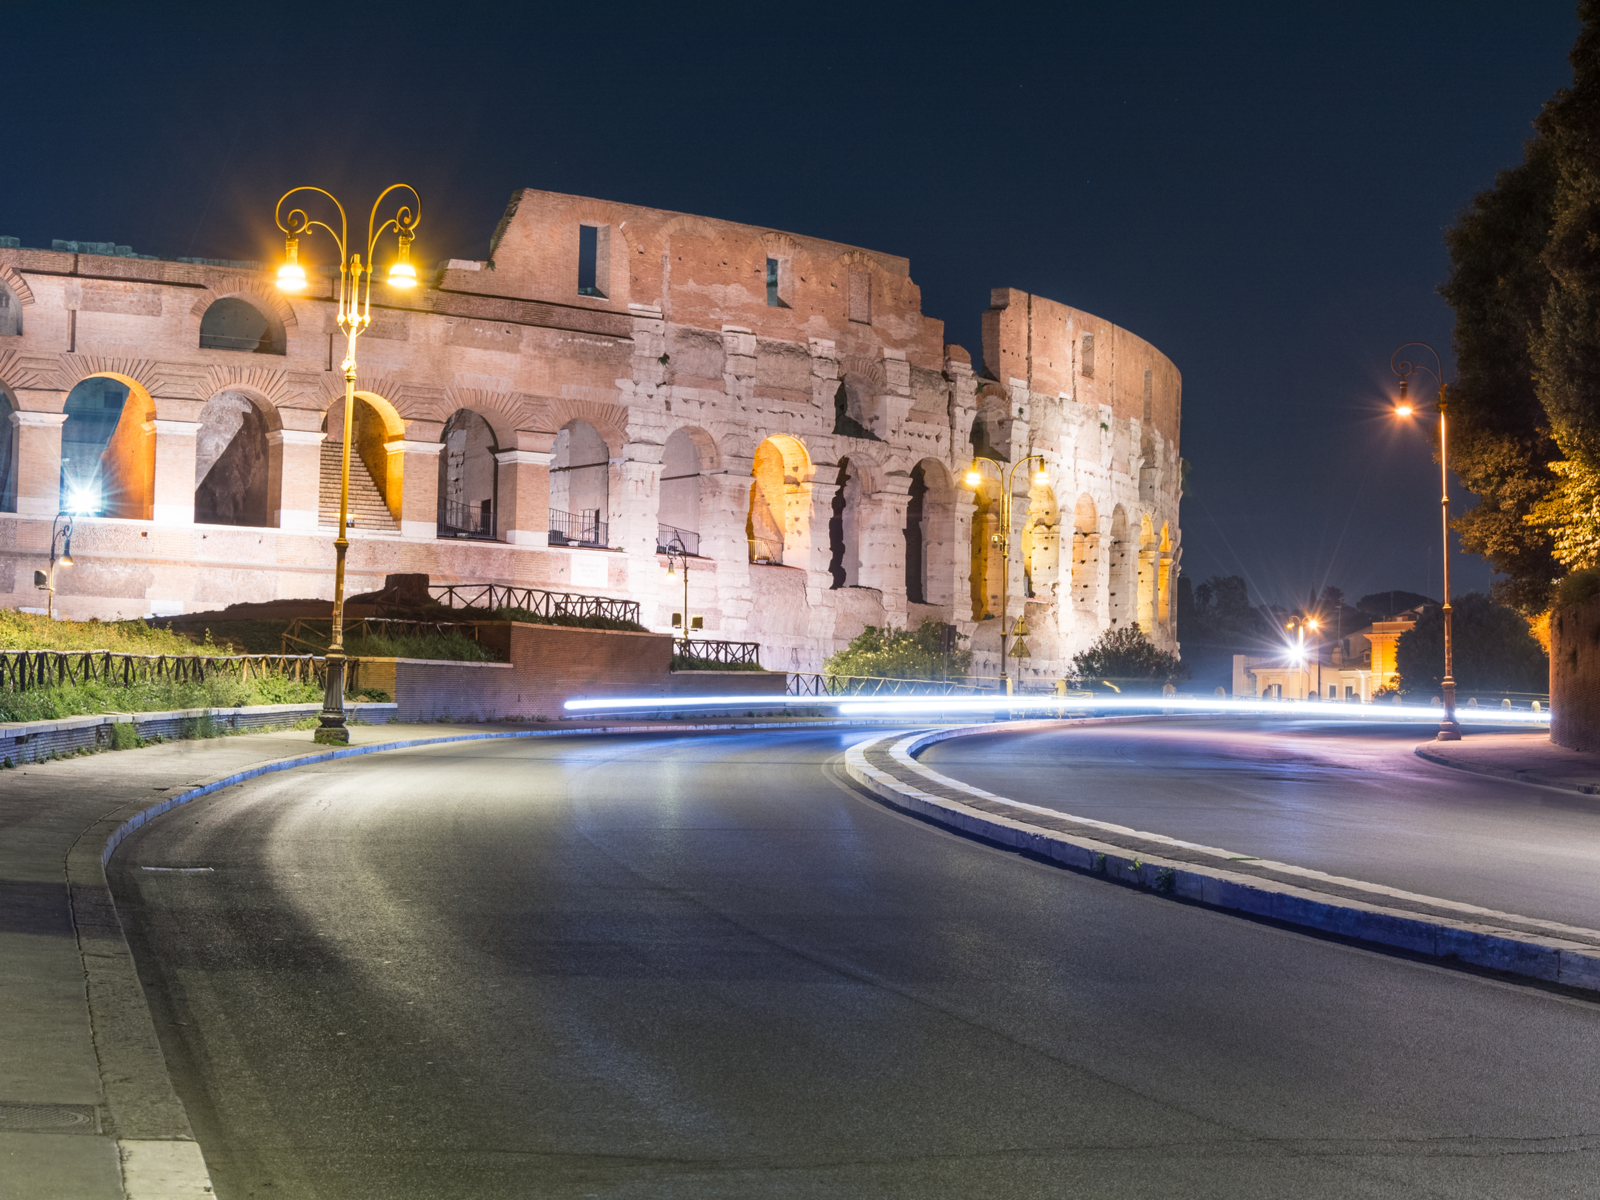 Night view of Celio, a top pick when considering Where to Stay in Rome, pictured at night